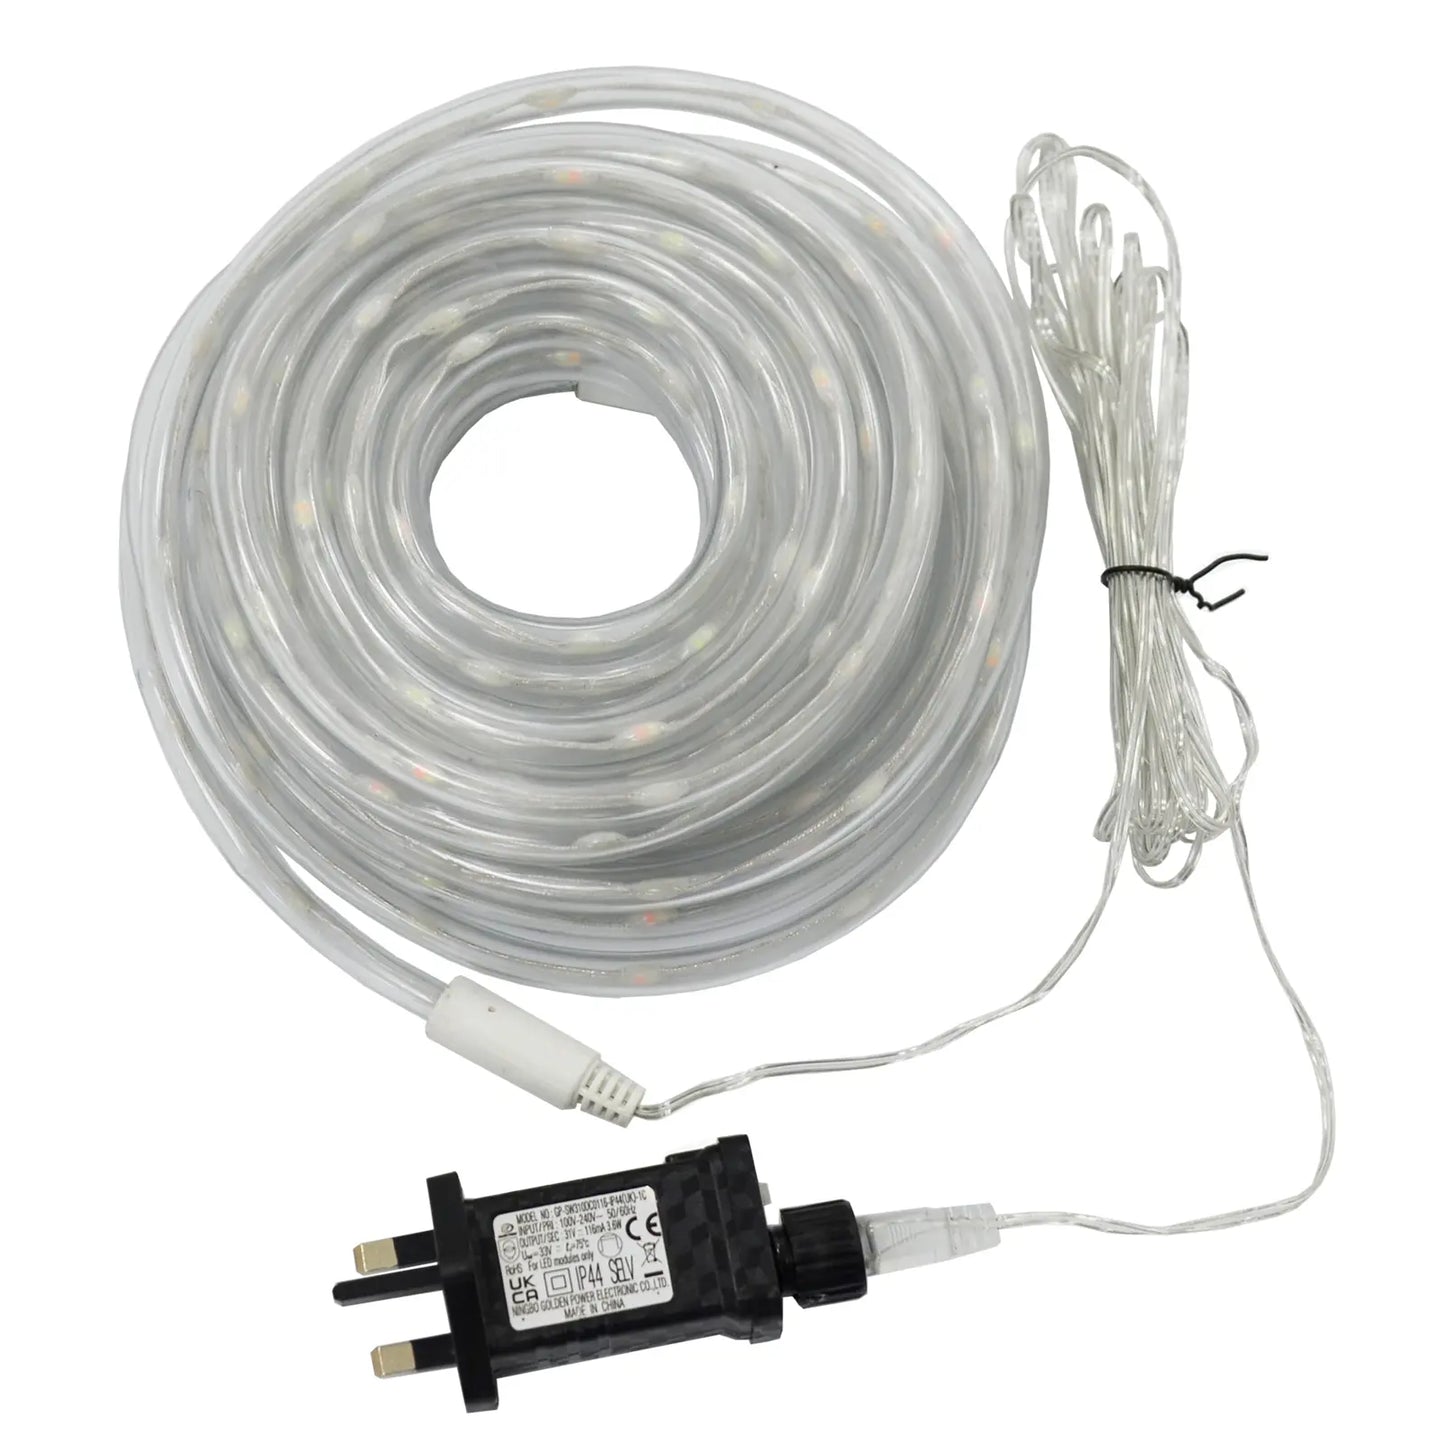 Coil of transparent LED rope light with plug in transformer